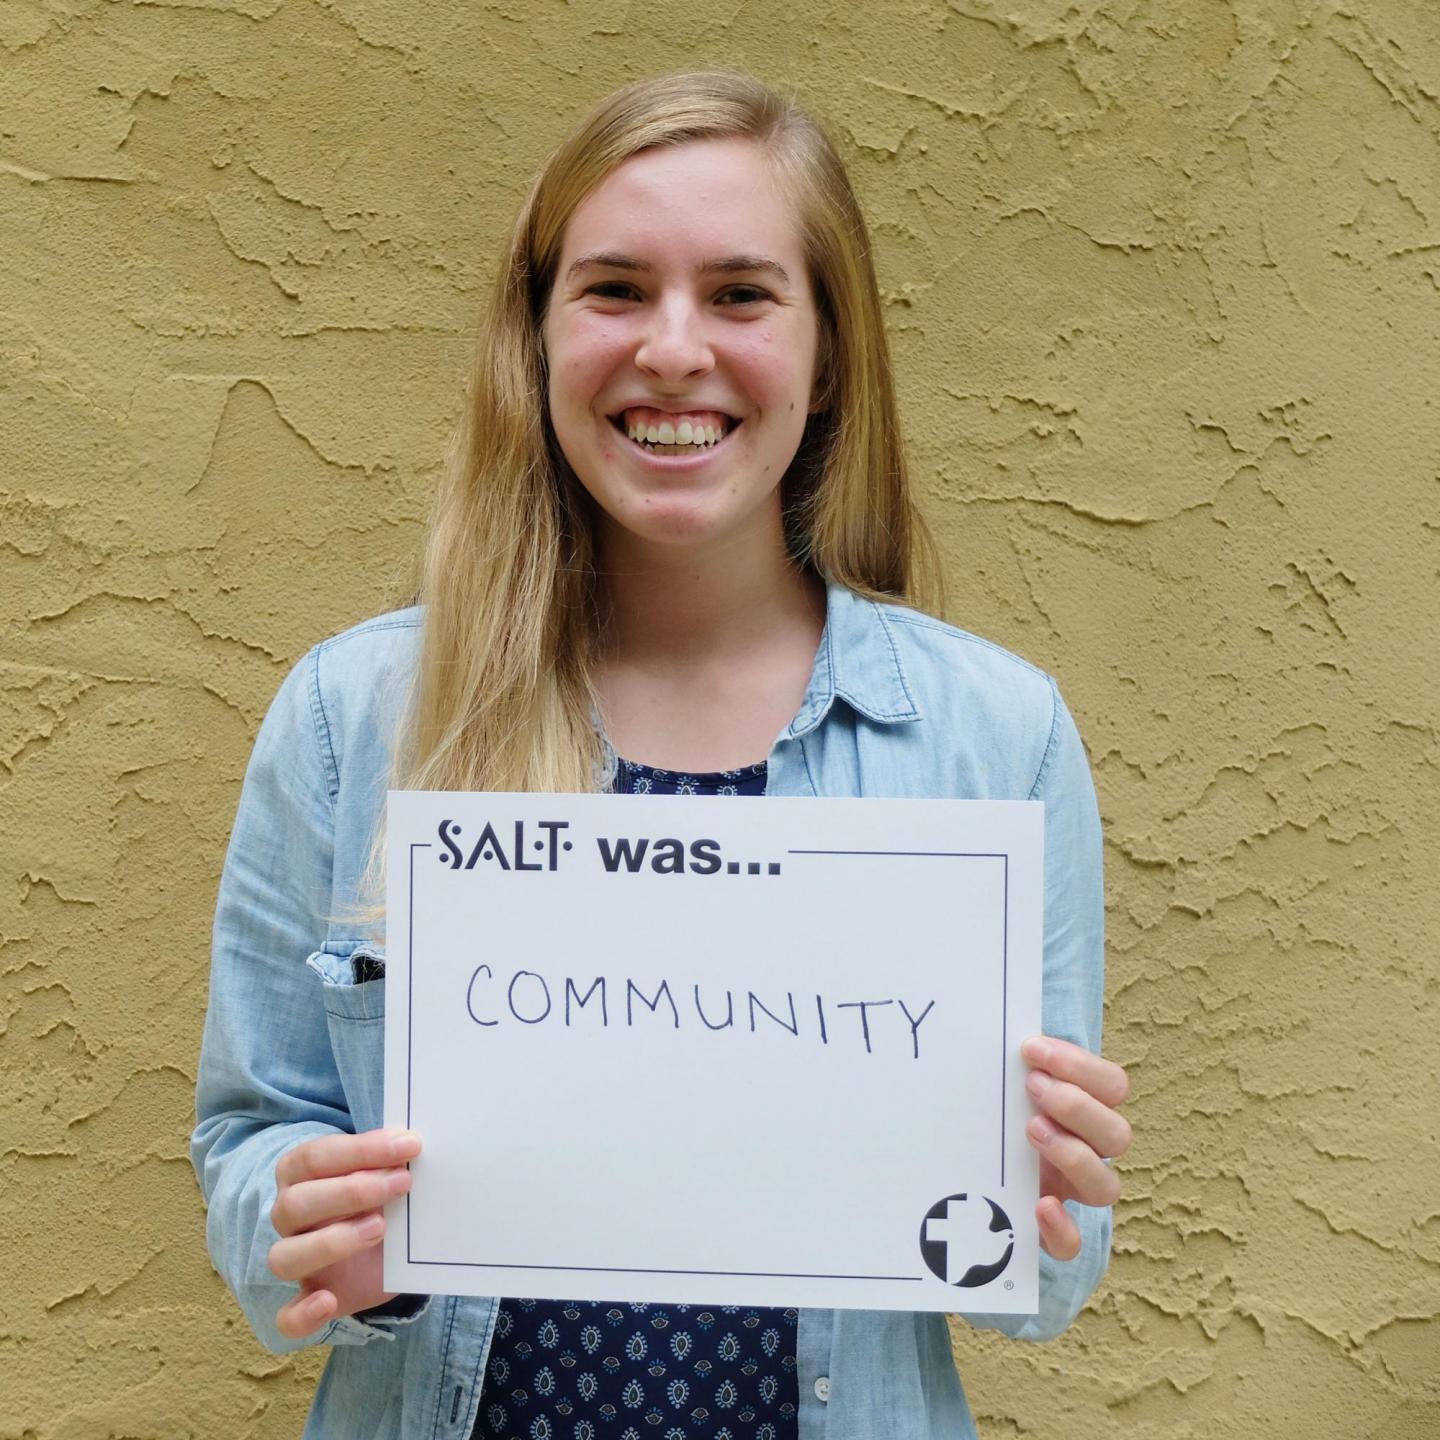 A young adult stands in front of a yellow wall and holds a sign that says, "SALT was community"